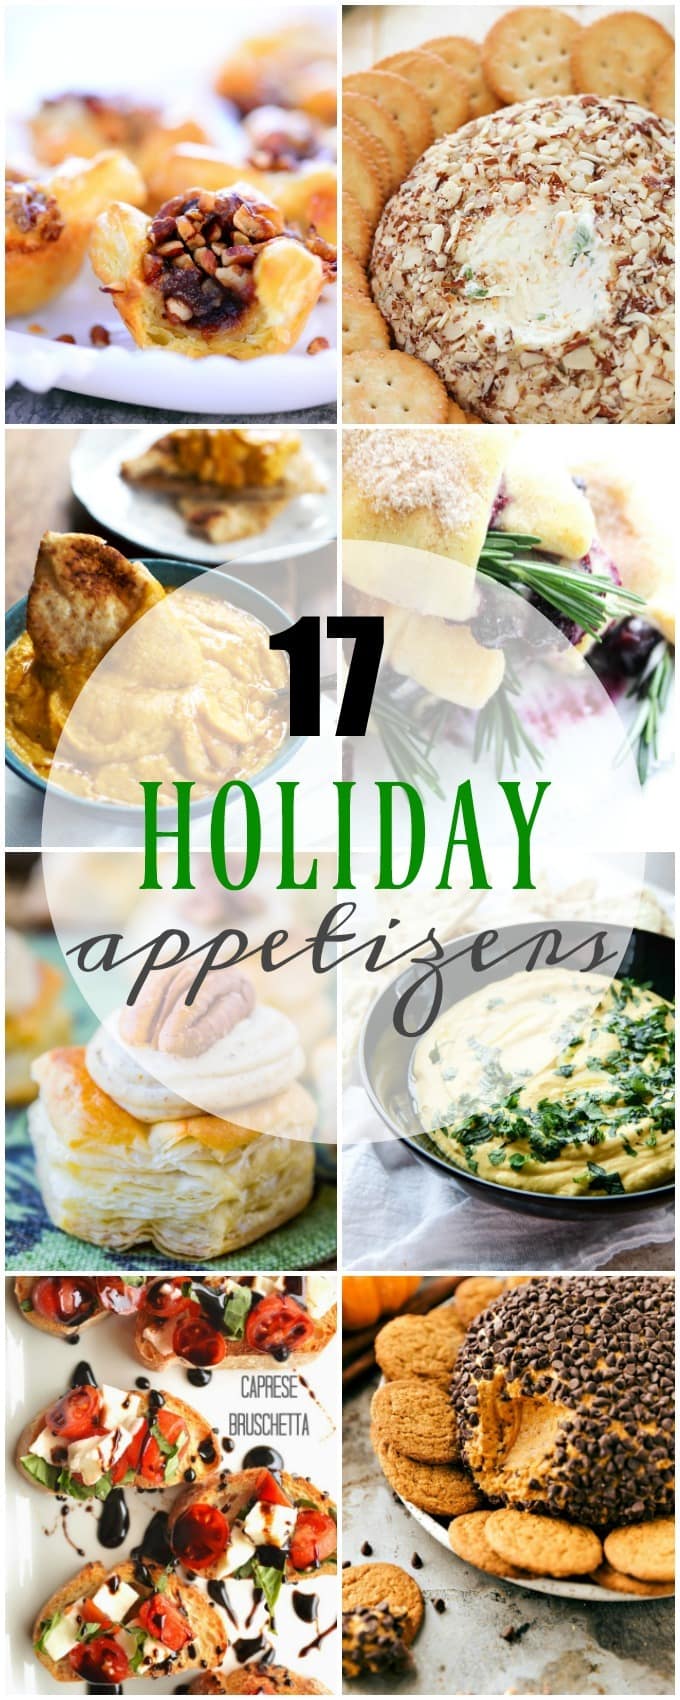 17 Holiday Appetizers to get you ready for your fun Holiday parties! These simple yet delicious holiday appetizers are exactly what you need for your upcoming get togethers. Whether you're hosting or attending a potluck, I've got you covered! :)